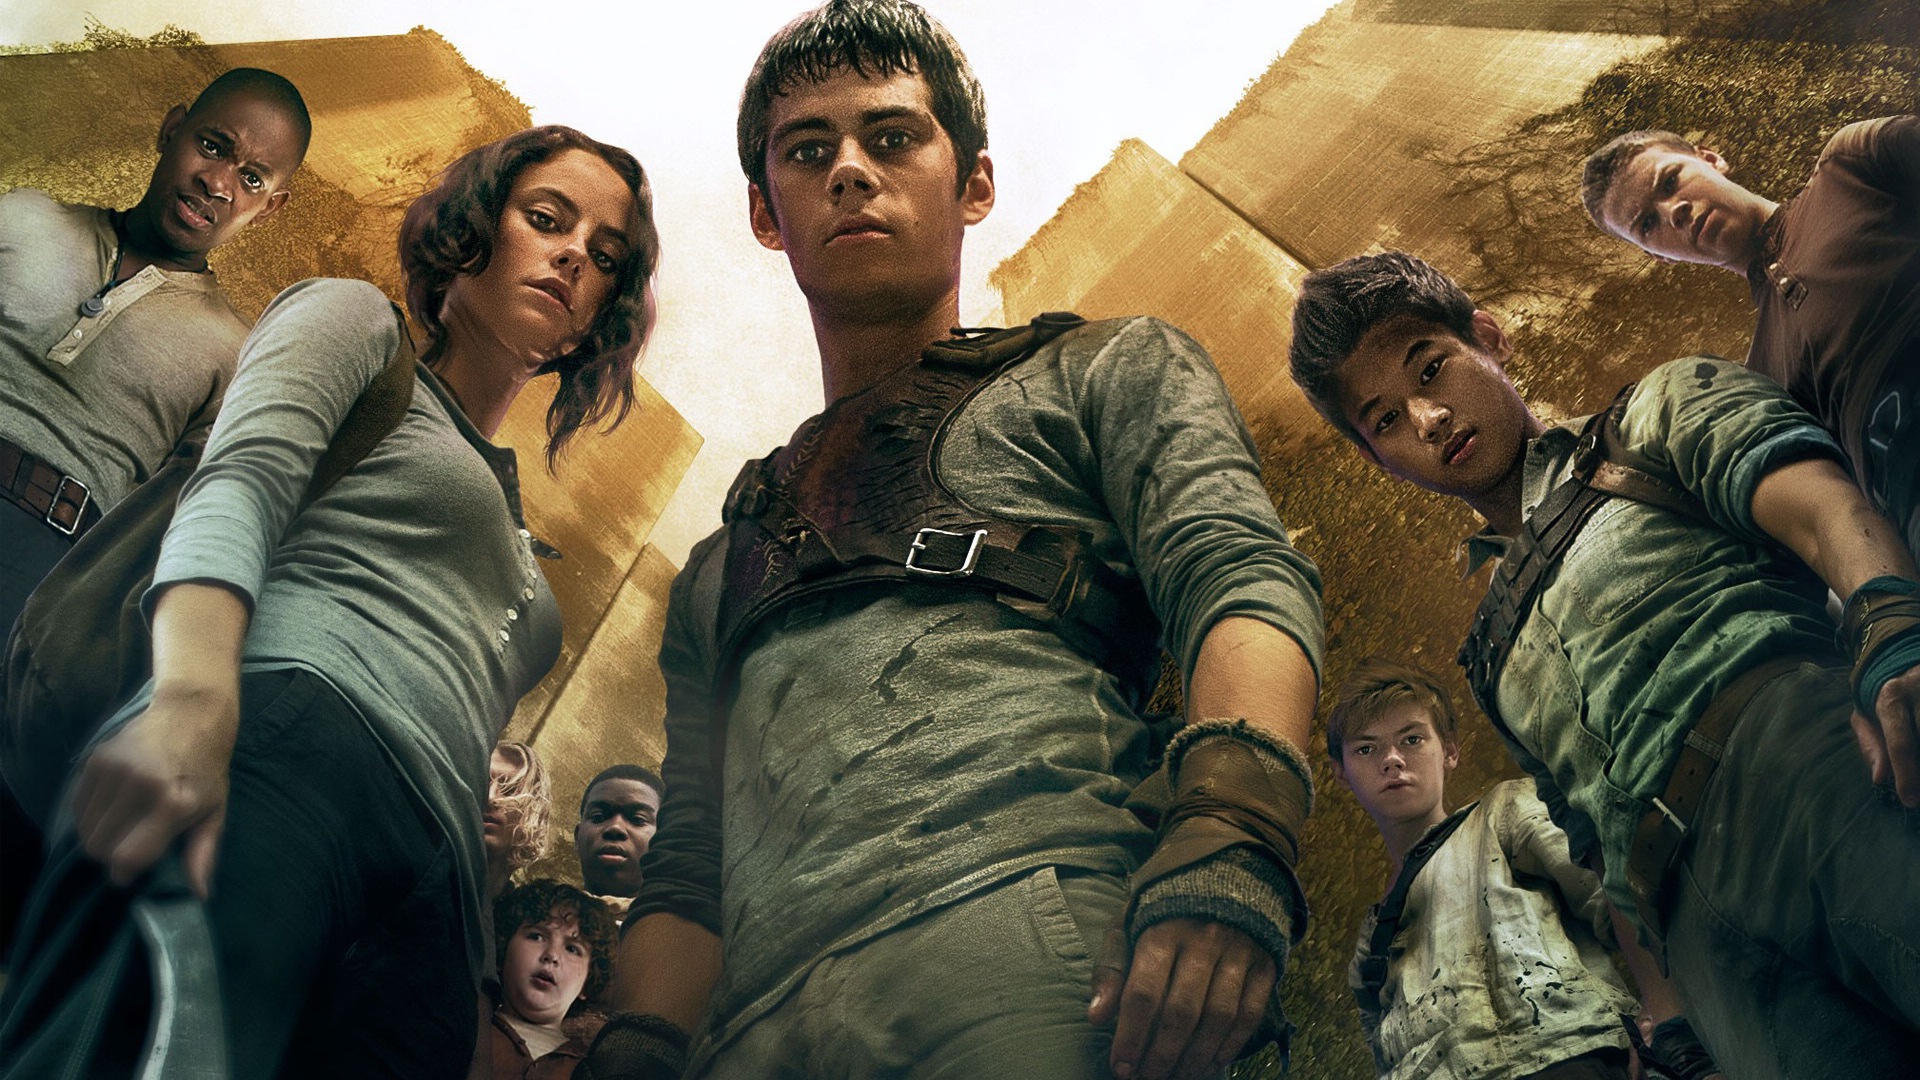 The Maze Runner HD movie wallpapers #3 - 1920x1080